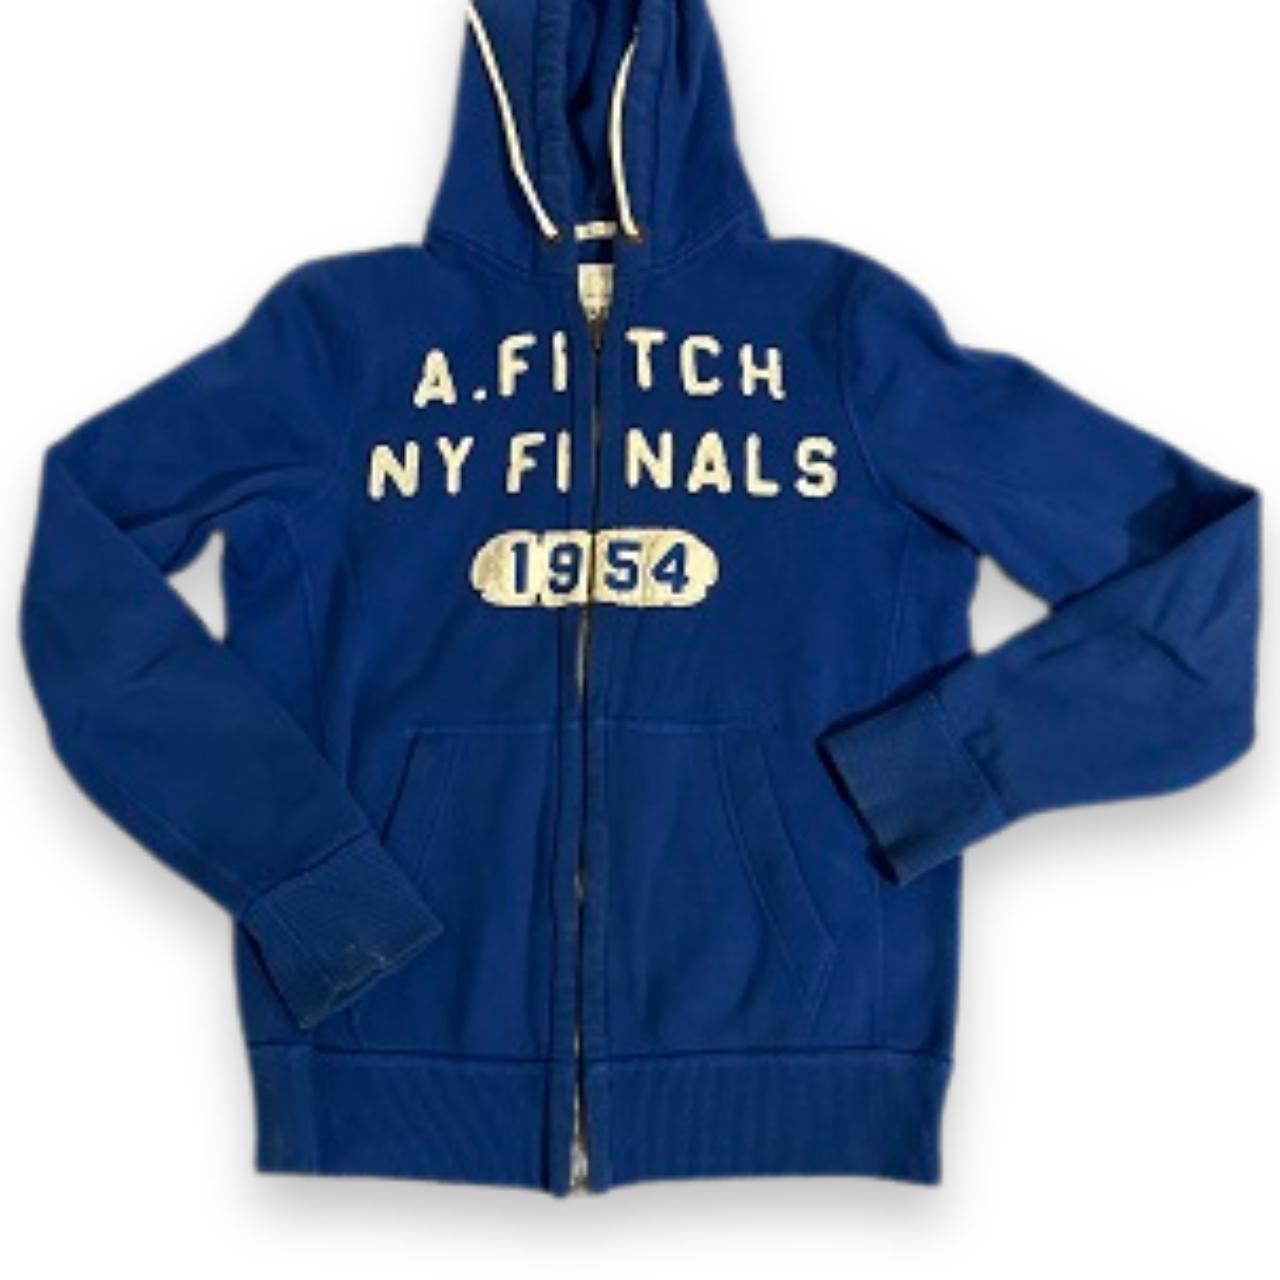 Vintage blue abercrombie & fitch NY Finals 1954 full zip up regular fit hoodie in M